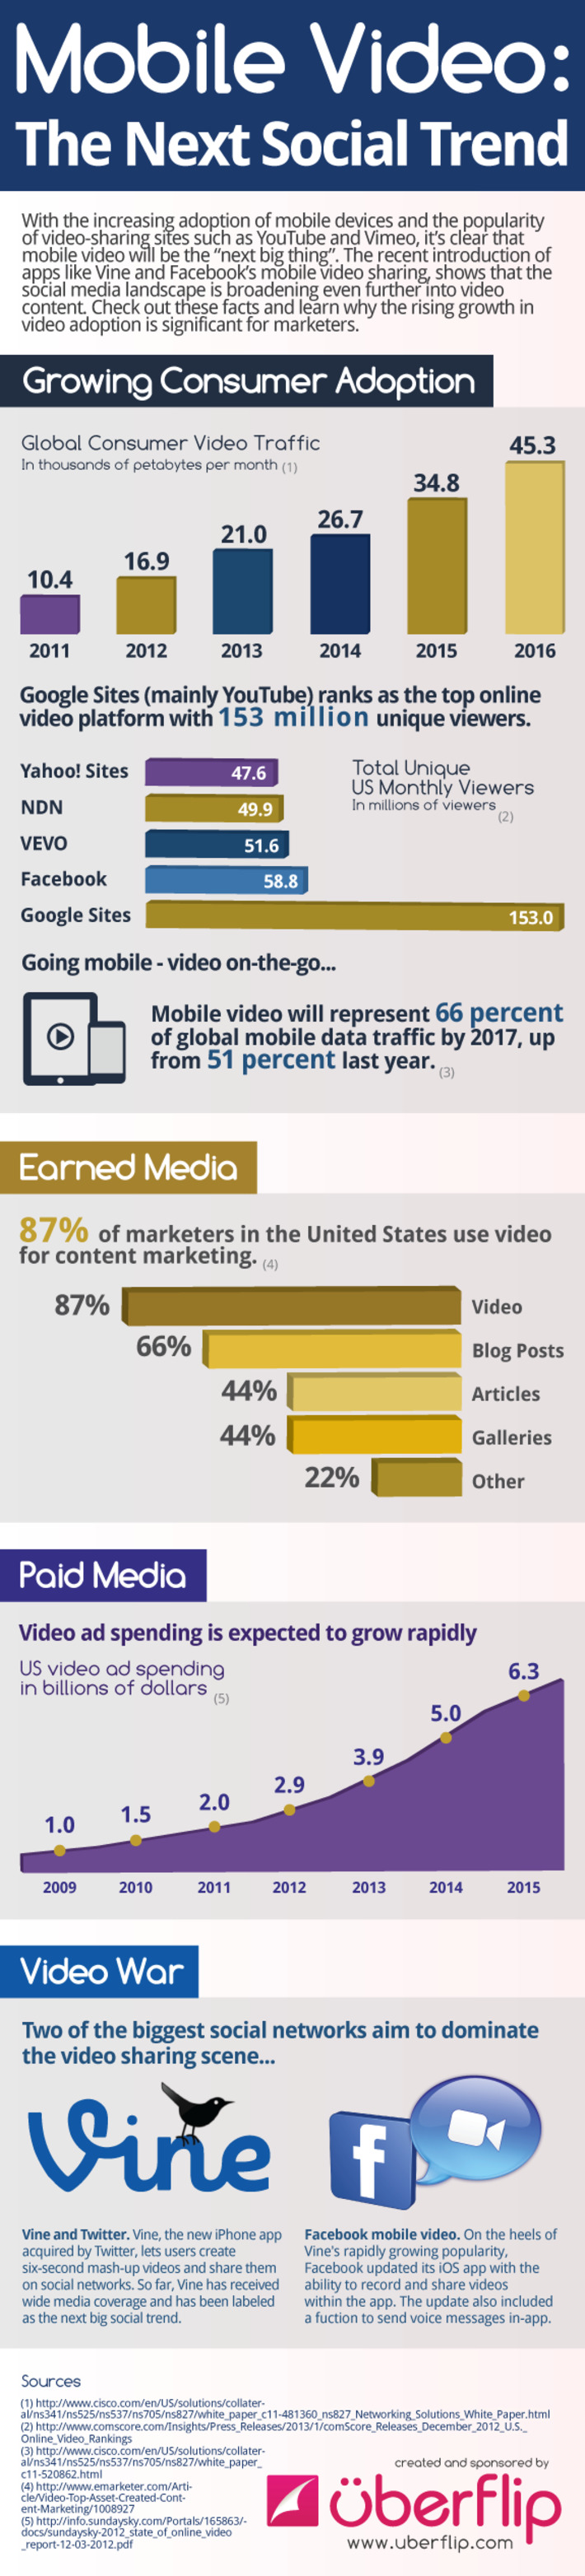 Is Mobile Video The Next Big Thing In Social Media? [INFOGRAPHIC] | The Social Media Times | Scoop.it